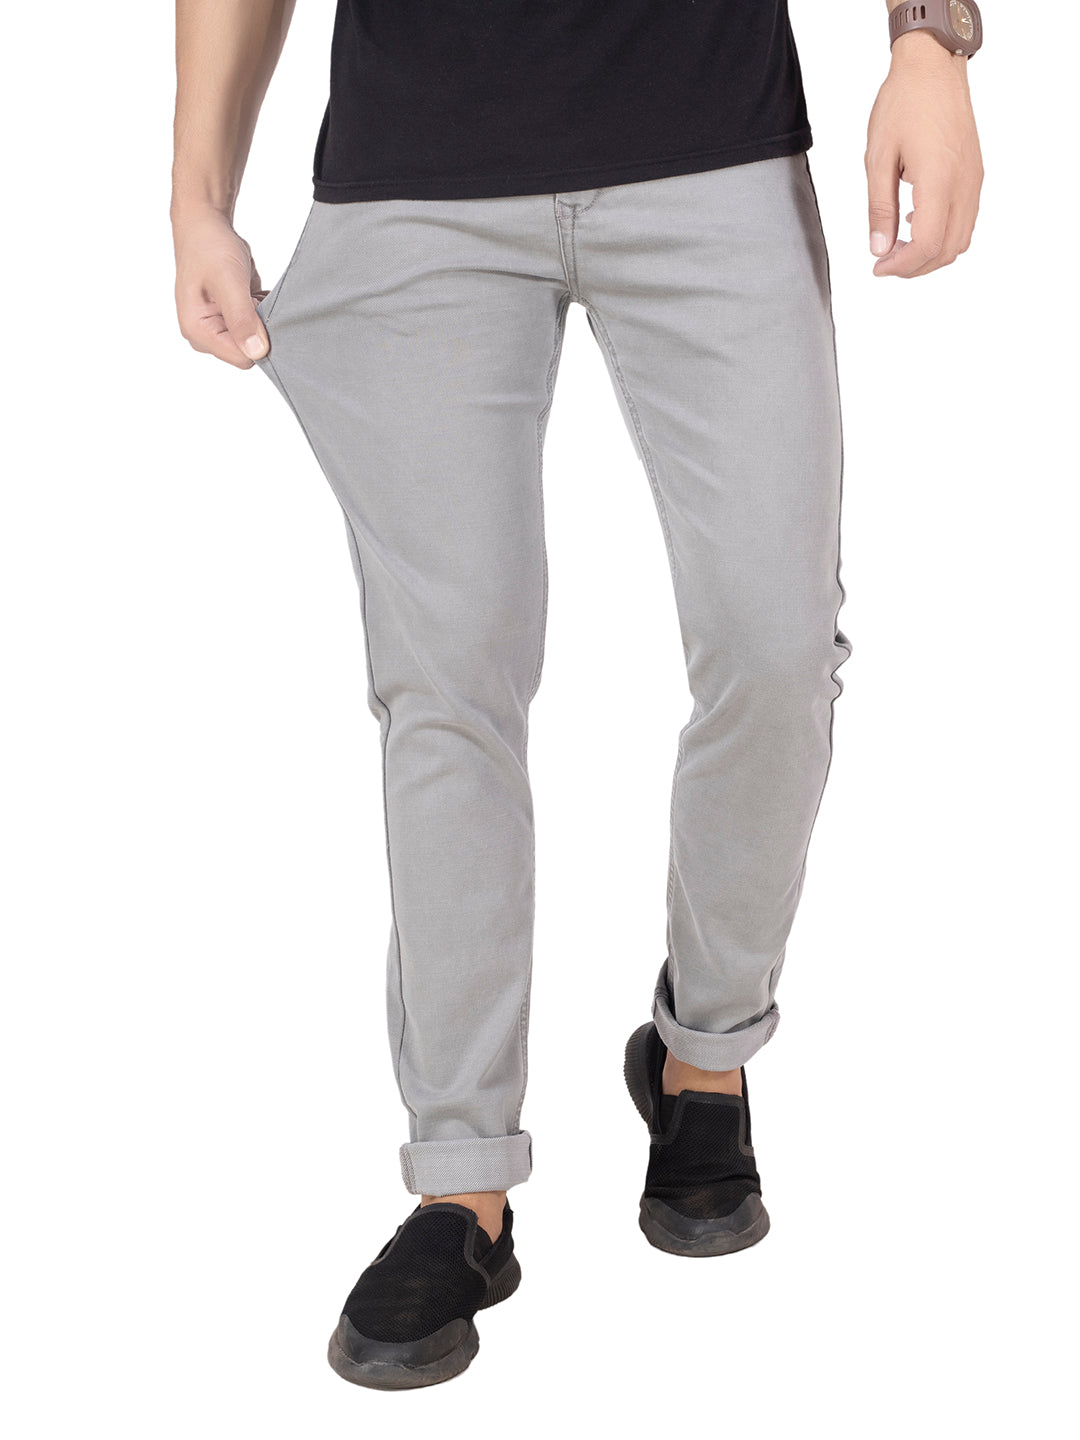 PLAIN COLORED JEANS <BR> Berlin- grey